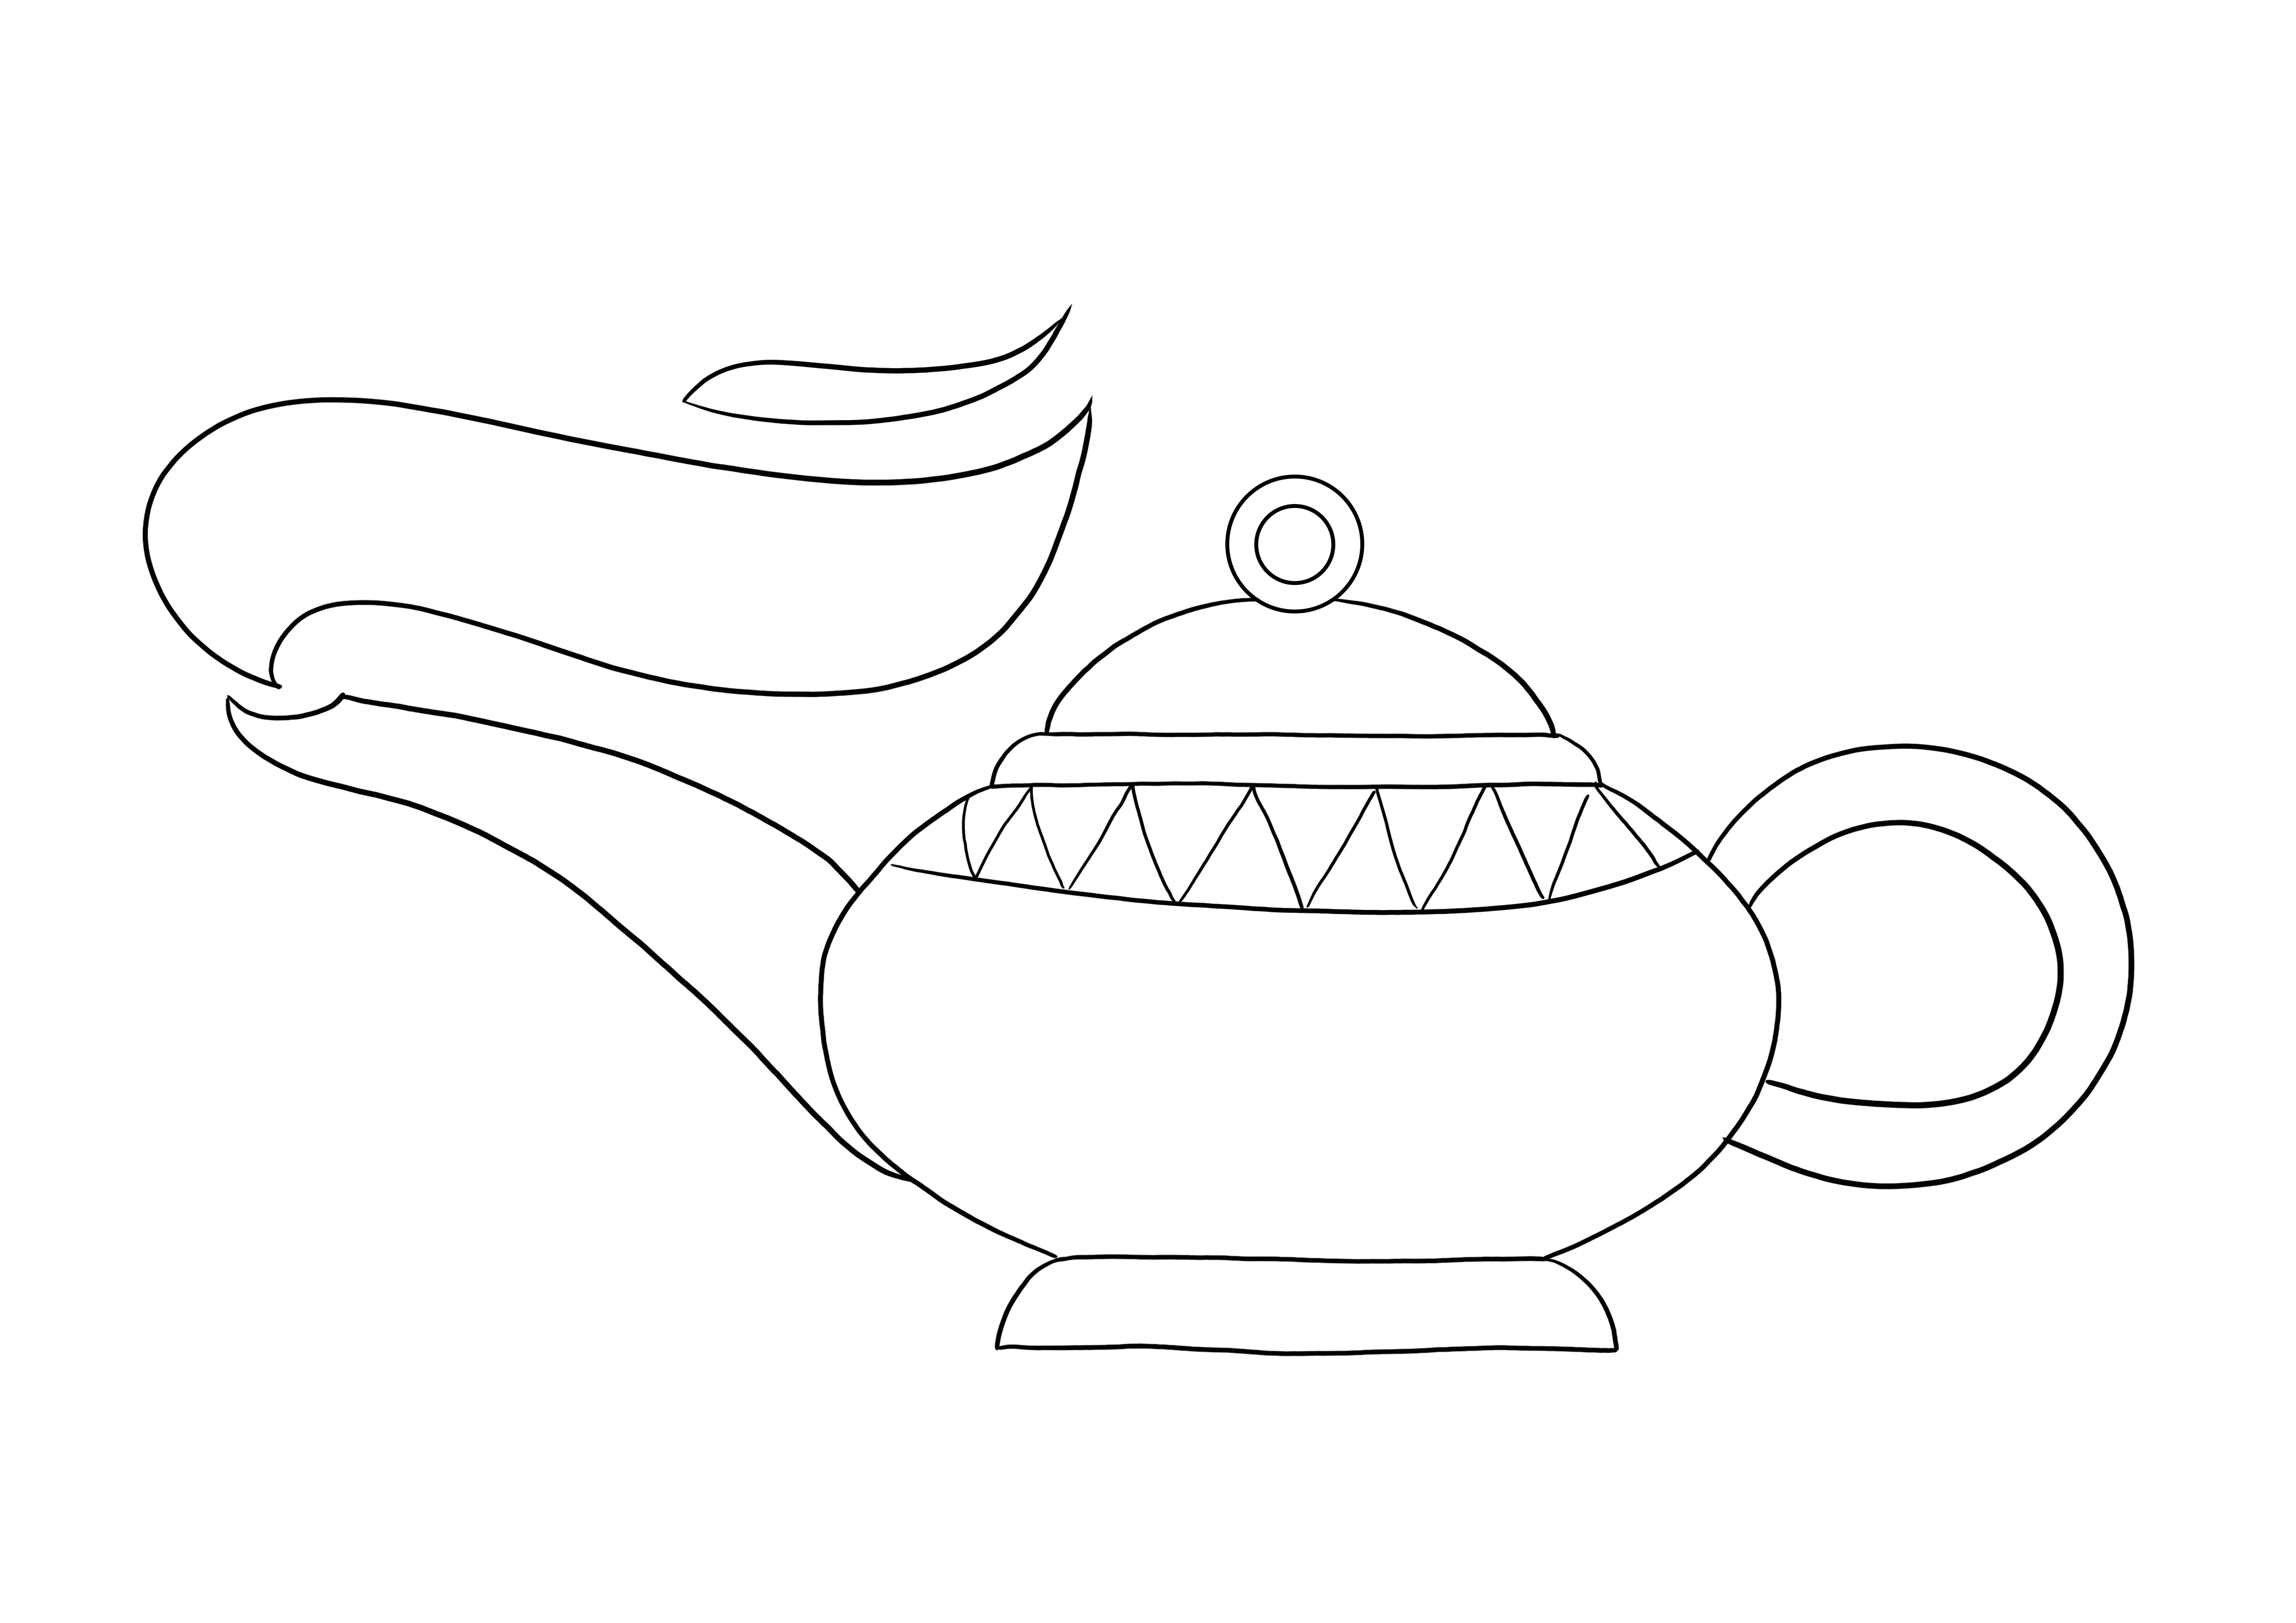 Jennie's pot is ready to print and color for free for kids